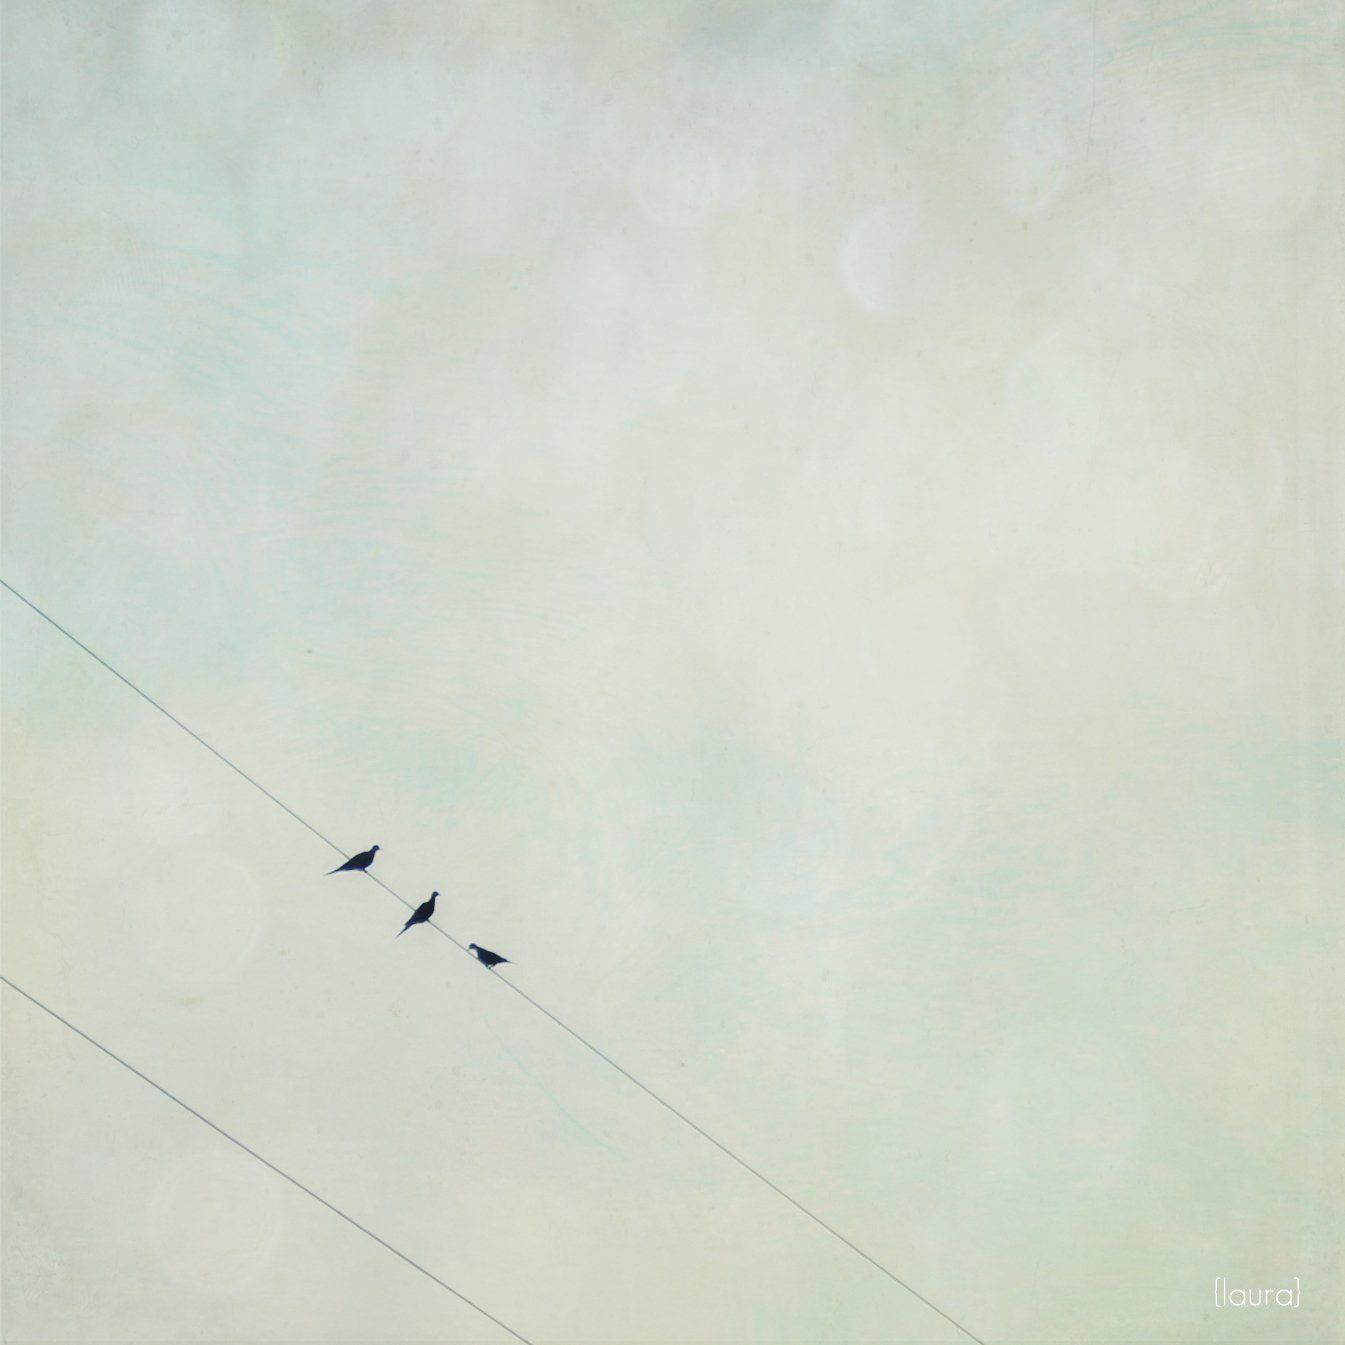 Birds On A Wire - Pale Vintage Blue - Vintage Inspired and Dreamy - Home Decor  - Fine Art Photograph 5X5 - DreamyPhoto